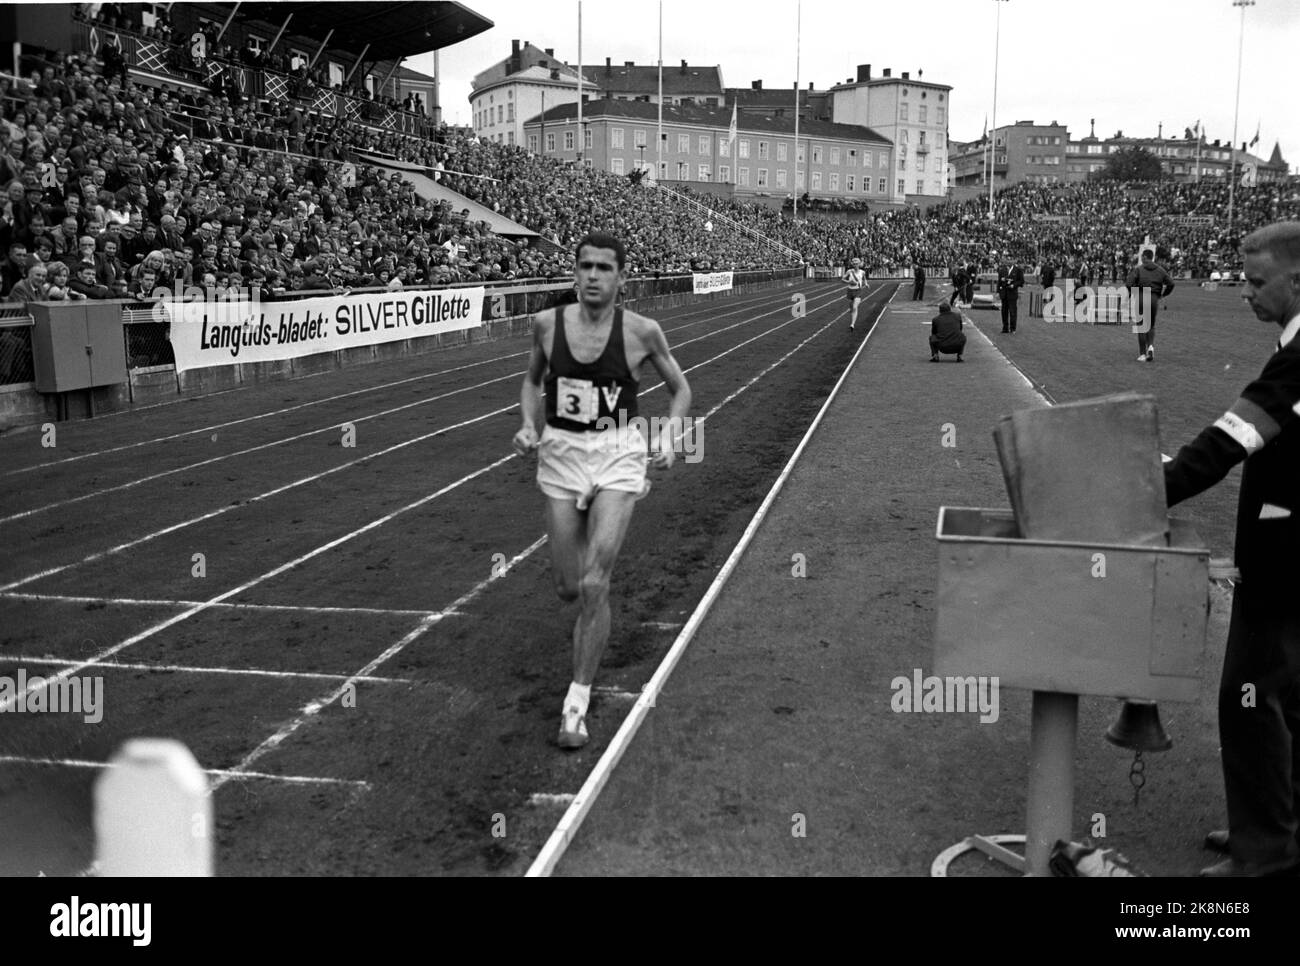 For full at bislett the new record was 27 39 4 photo hires stock